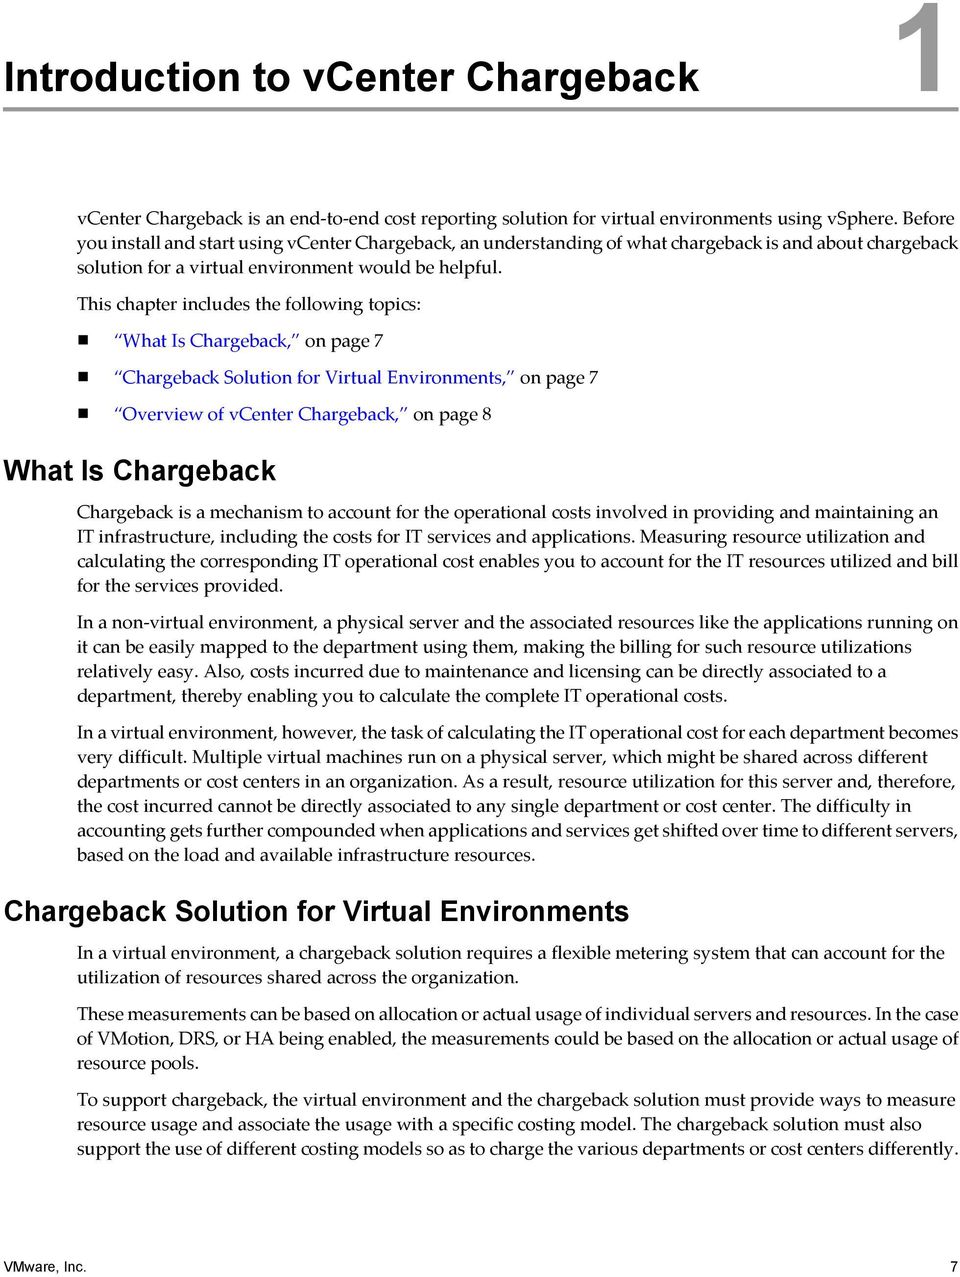 This chapter includes the following topics: What Is Chargeback, on page 7 Chargeback Solution for Virtual Environments, on page 7 Overview of vcenter Chargeback, on page 8 What Is Chargeback